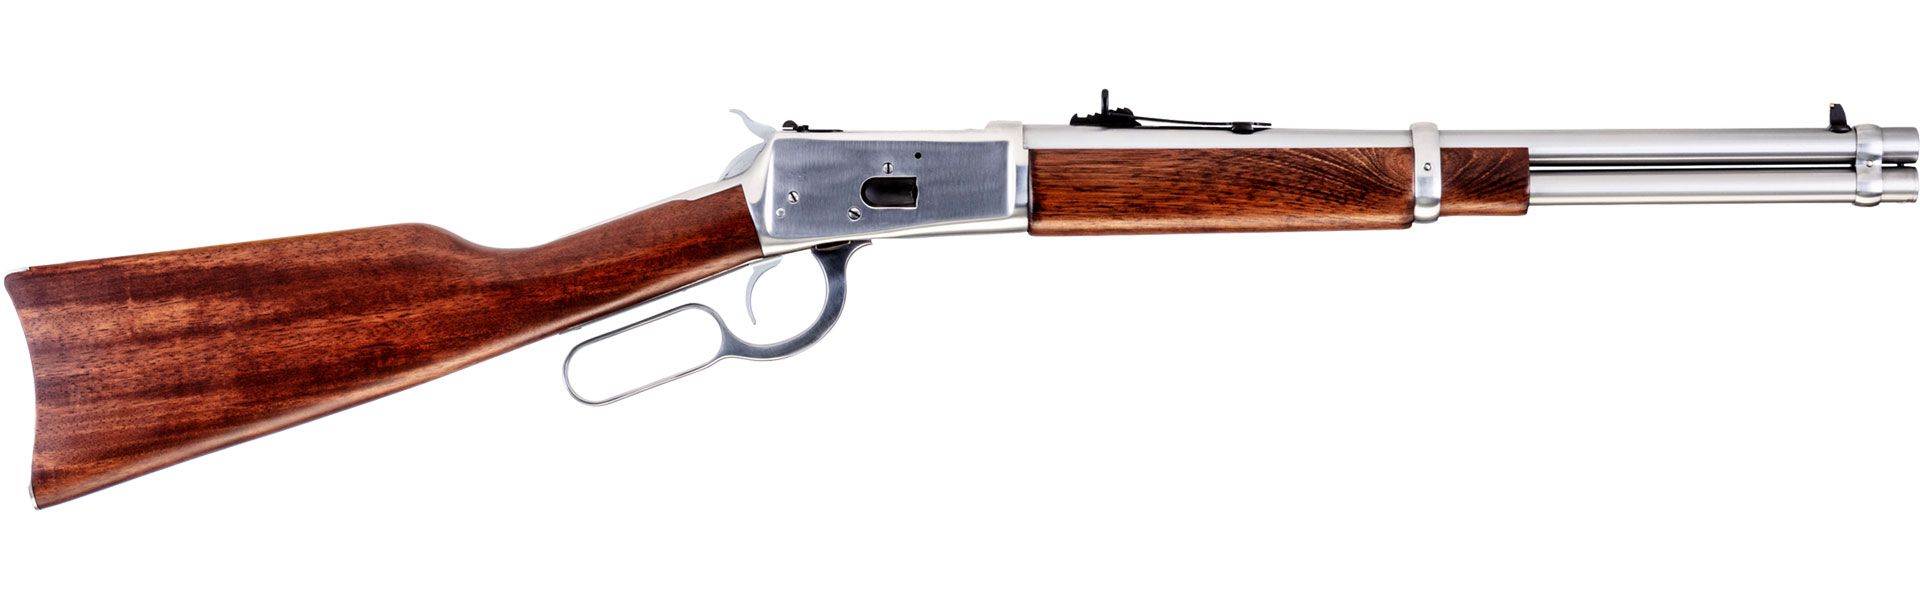 R92 Hardwood, .44 MAG, Polished Stainless, 16 In.